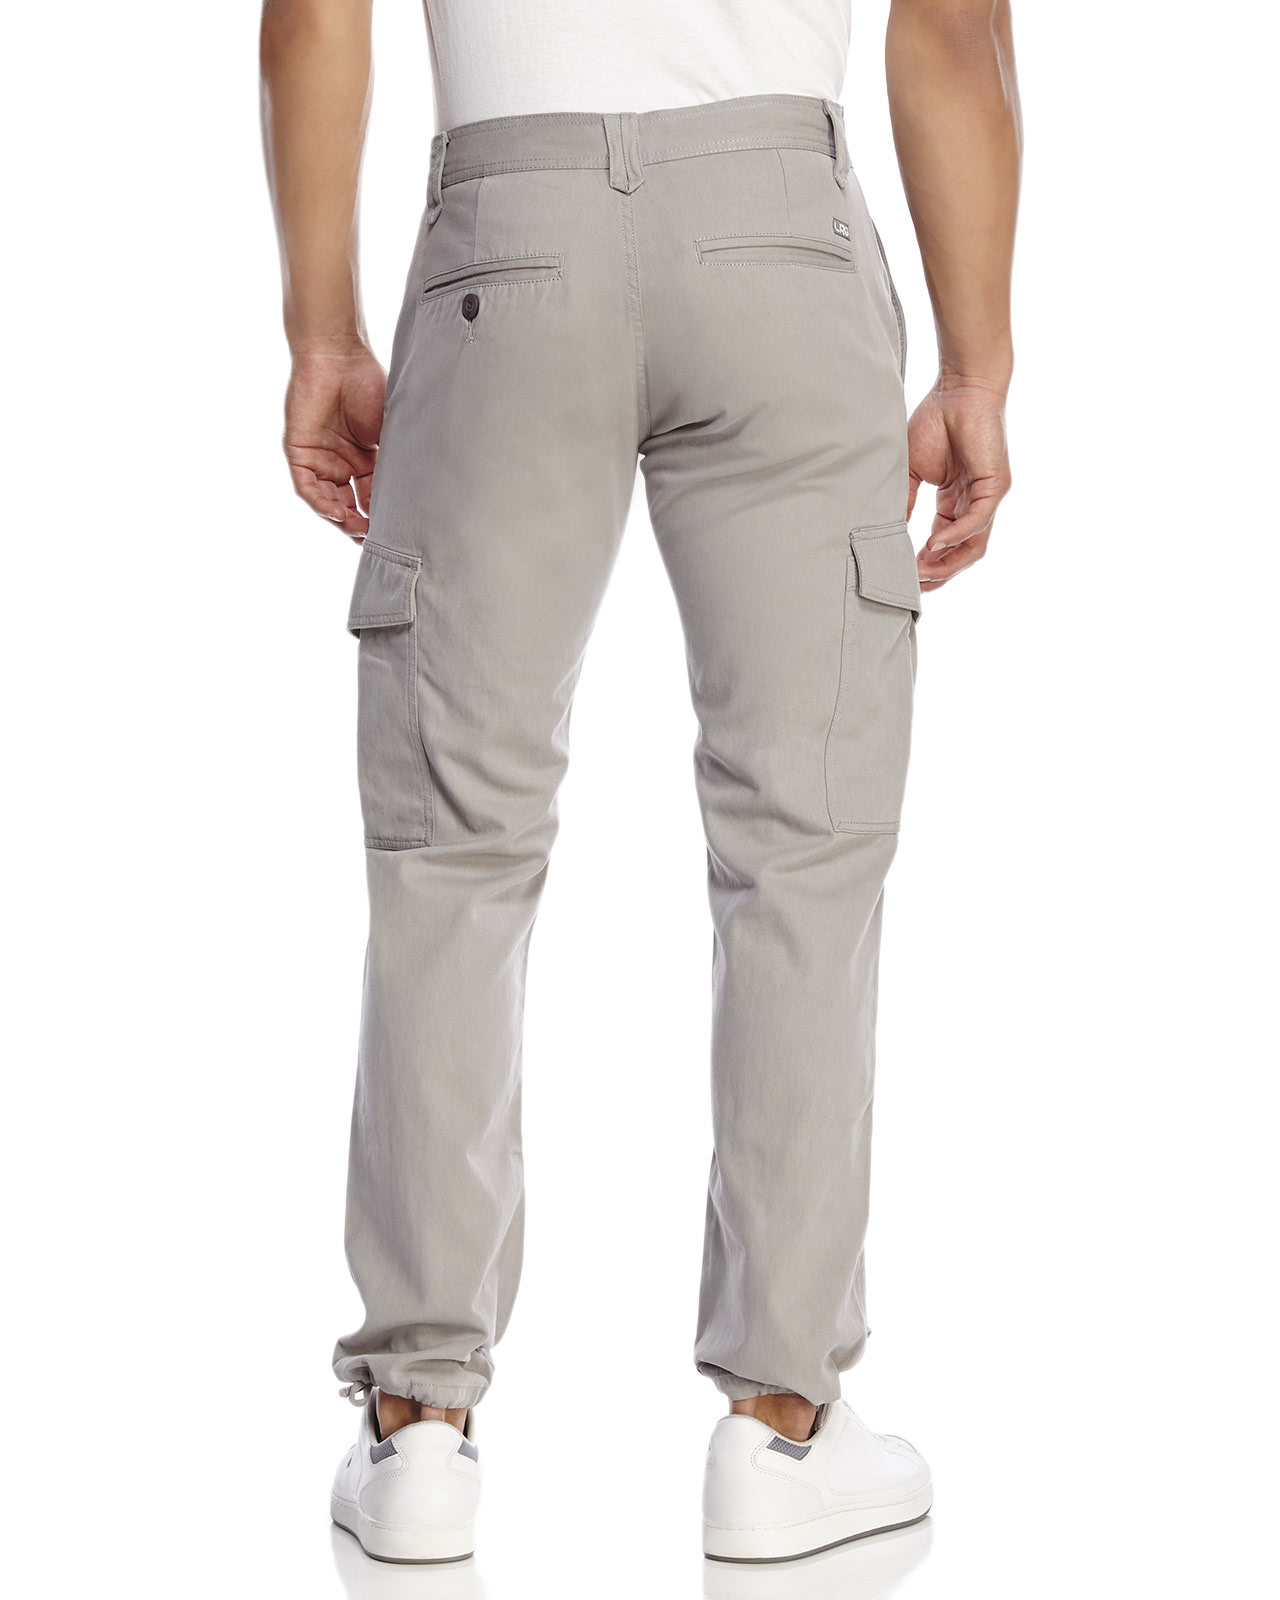 Lyst - Lrg Tapered Cargo Pants in Gray for Men